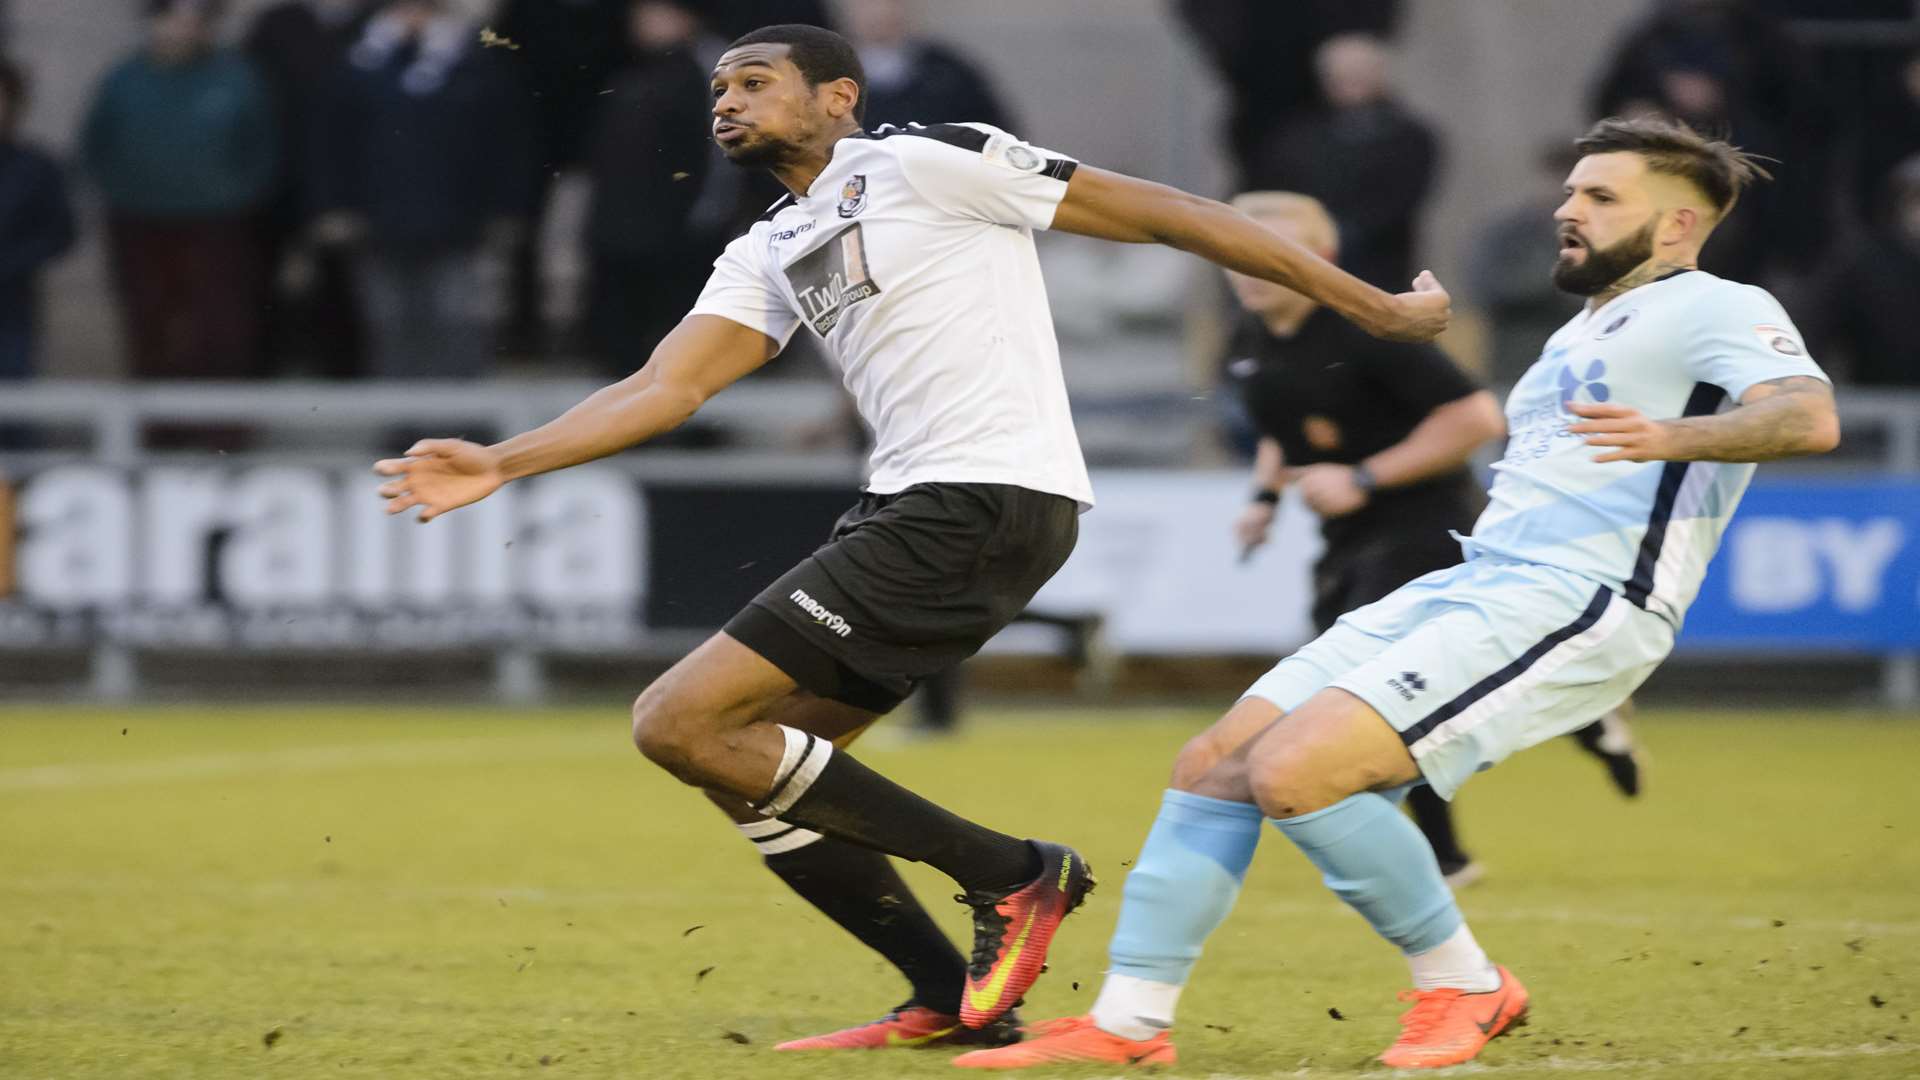 Danny Mills is staying with Dartford Picture: Andy Payton